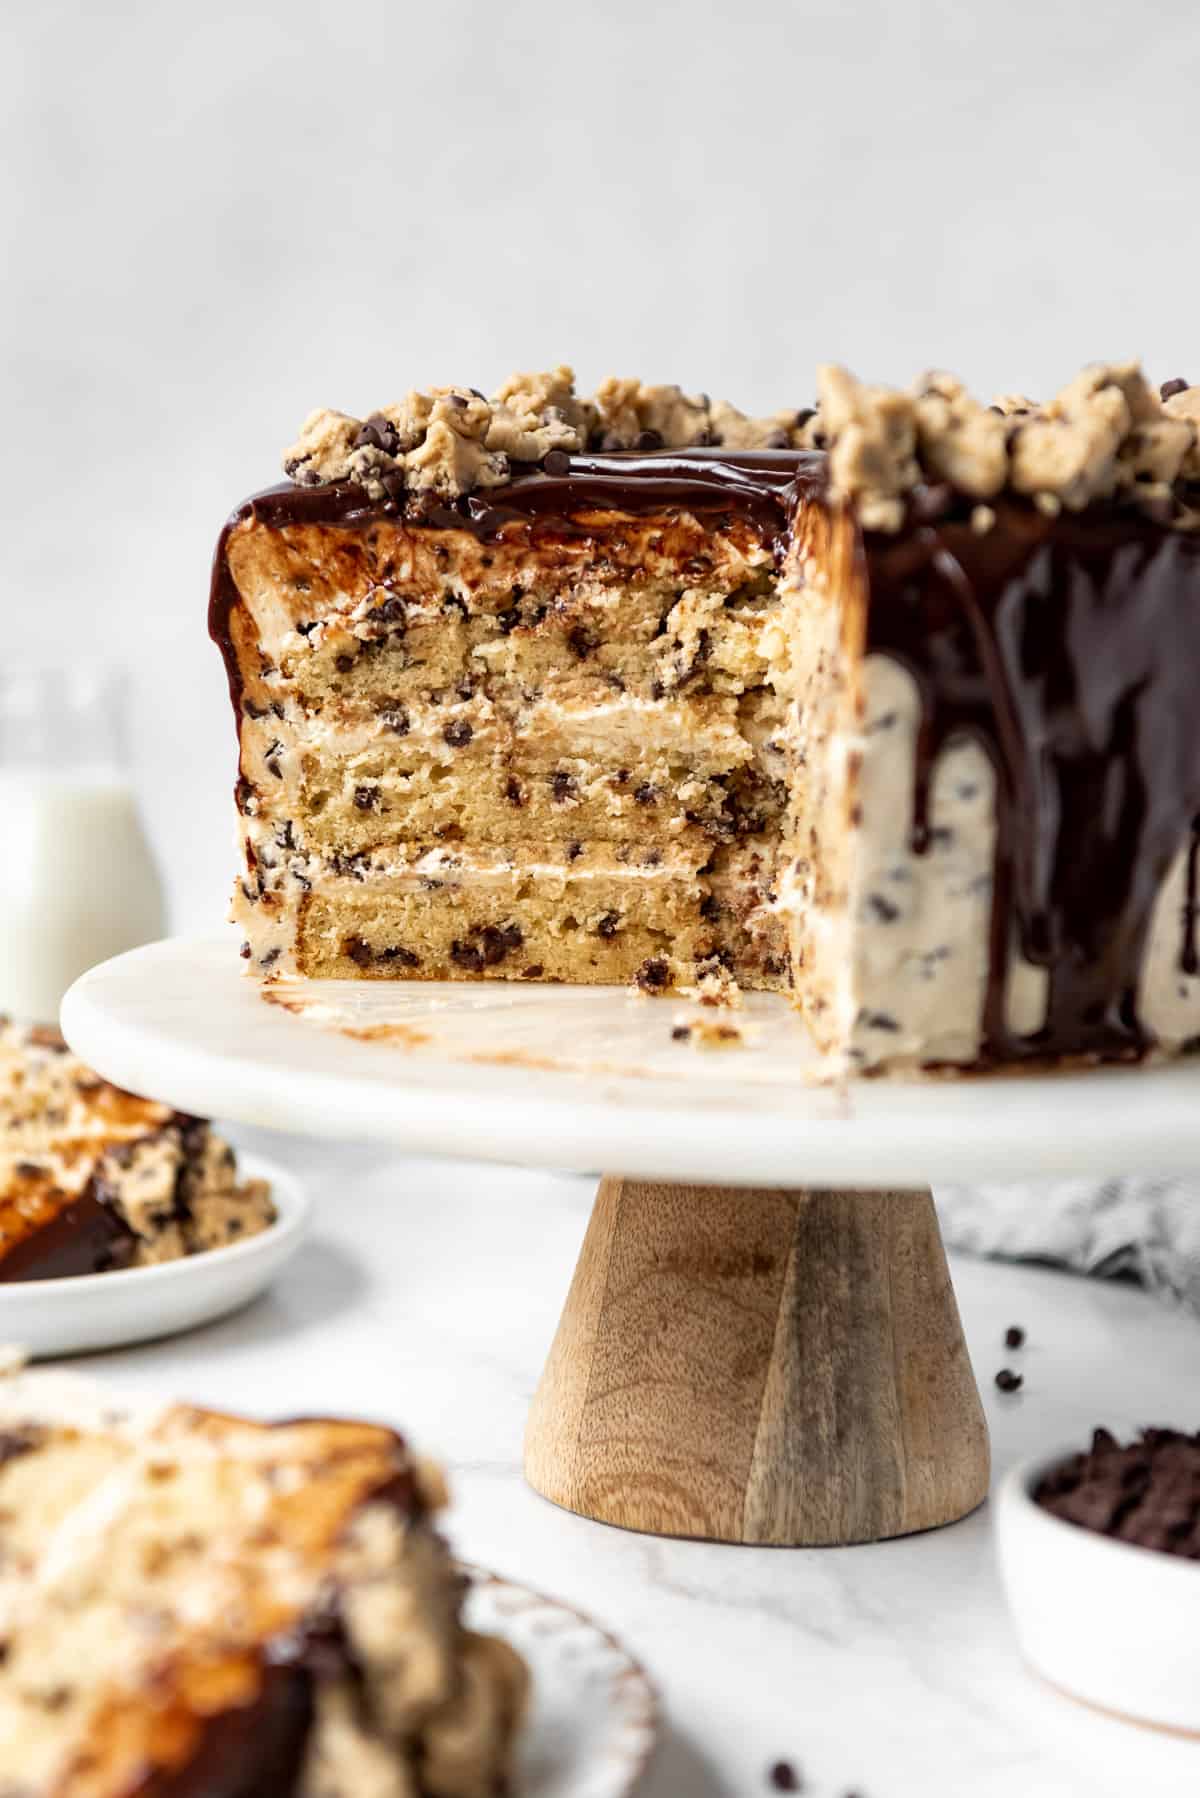 A three-layer chocolate chip cookie dough cake that has been sliced into showing the layers on a cake stand.